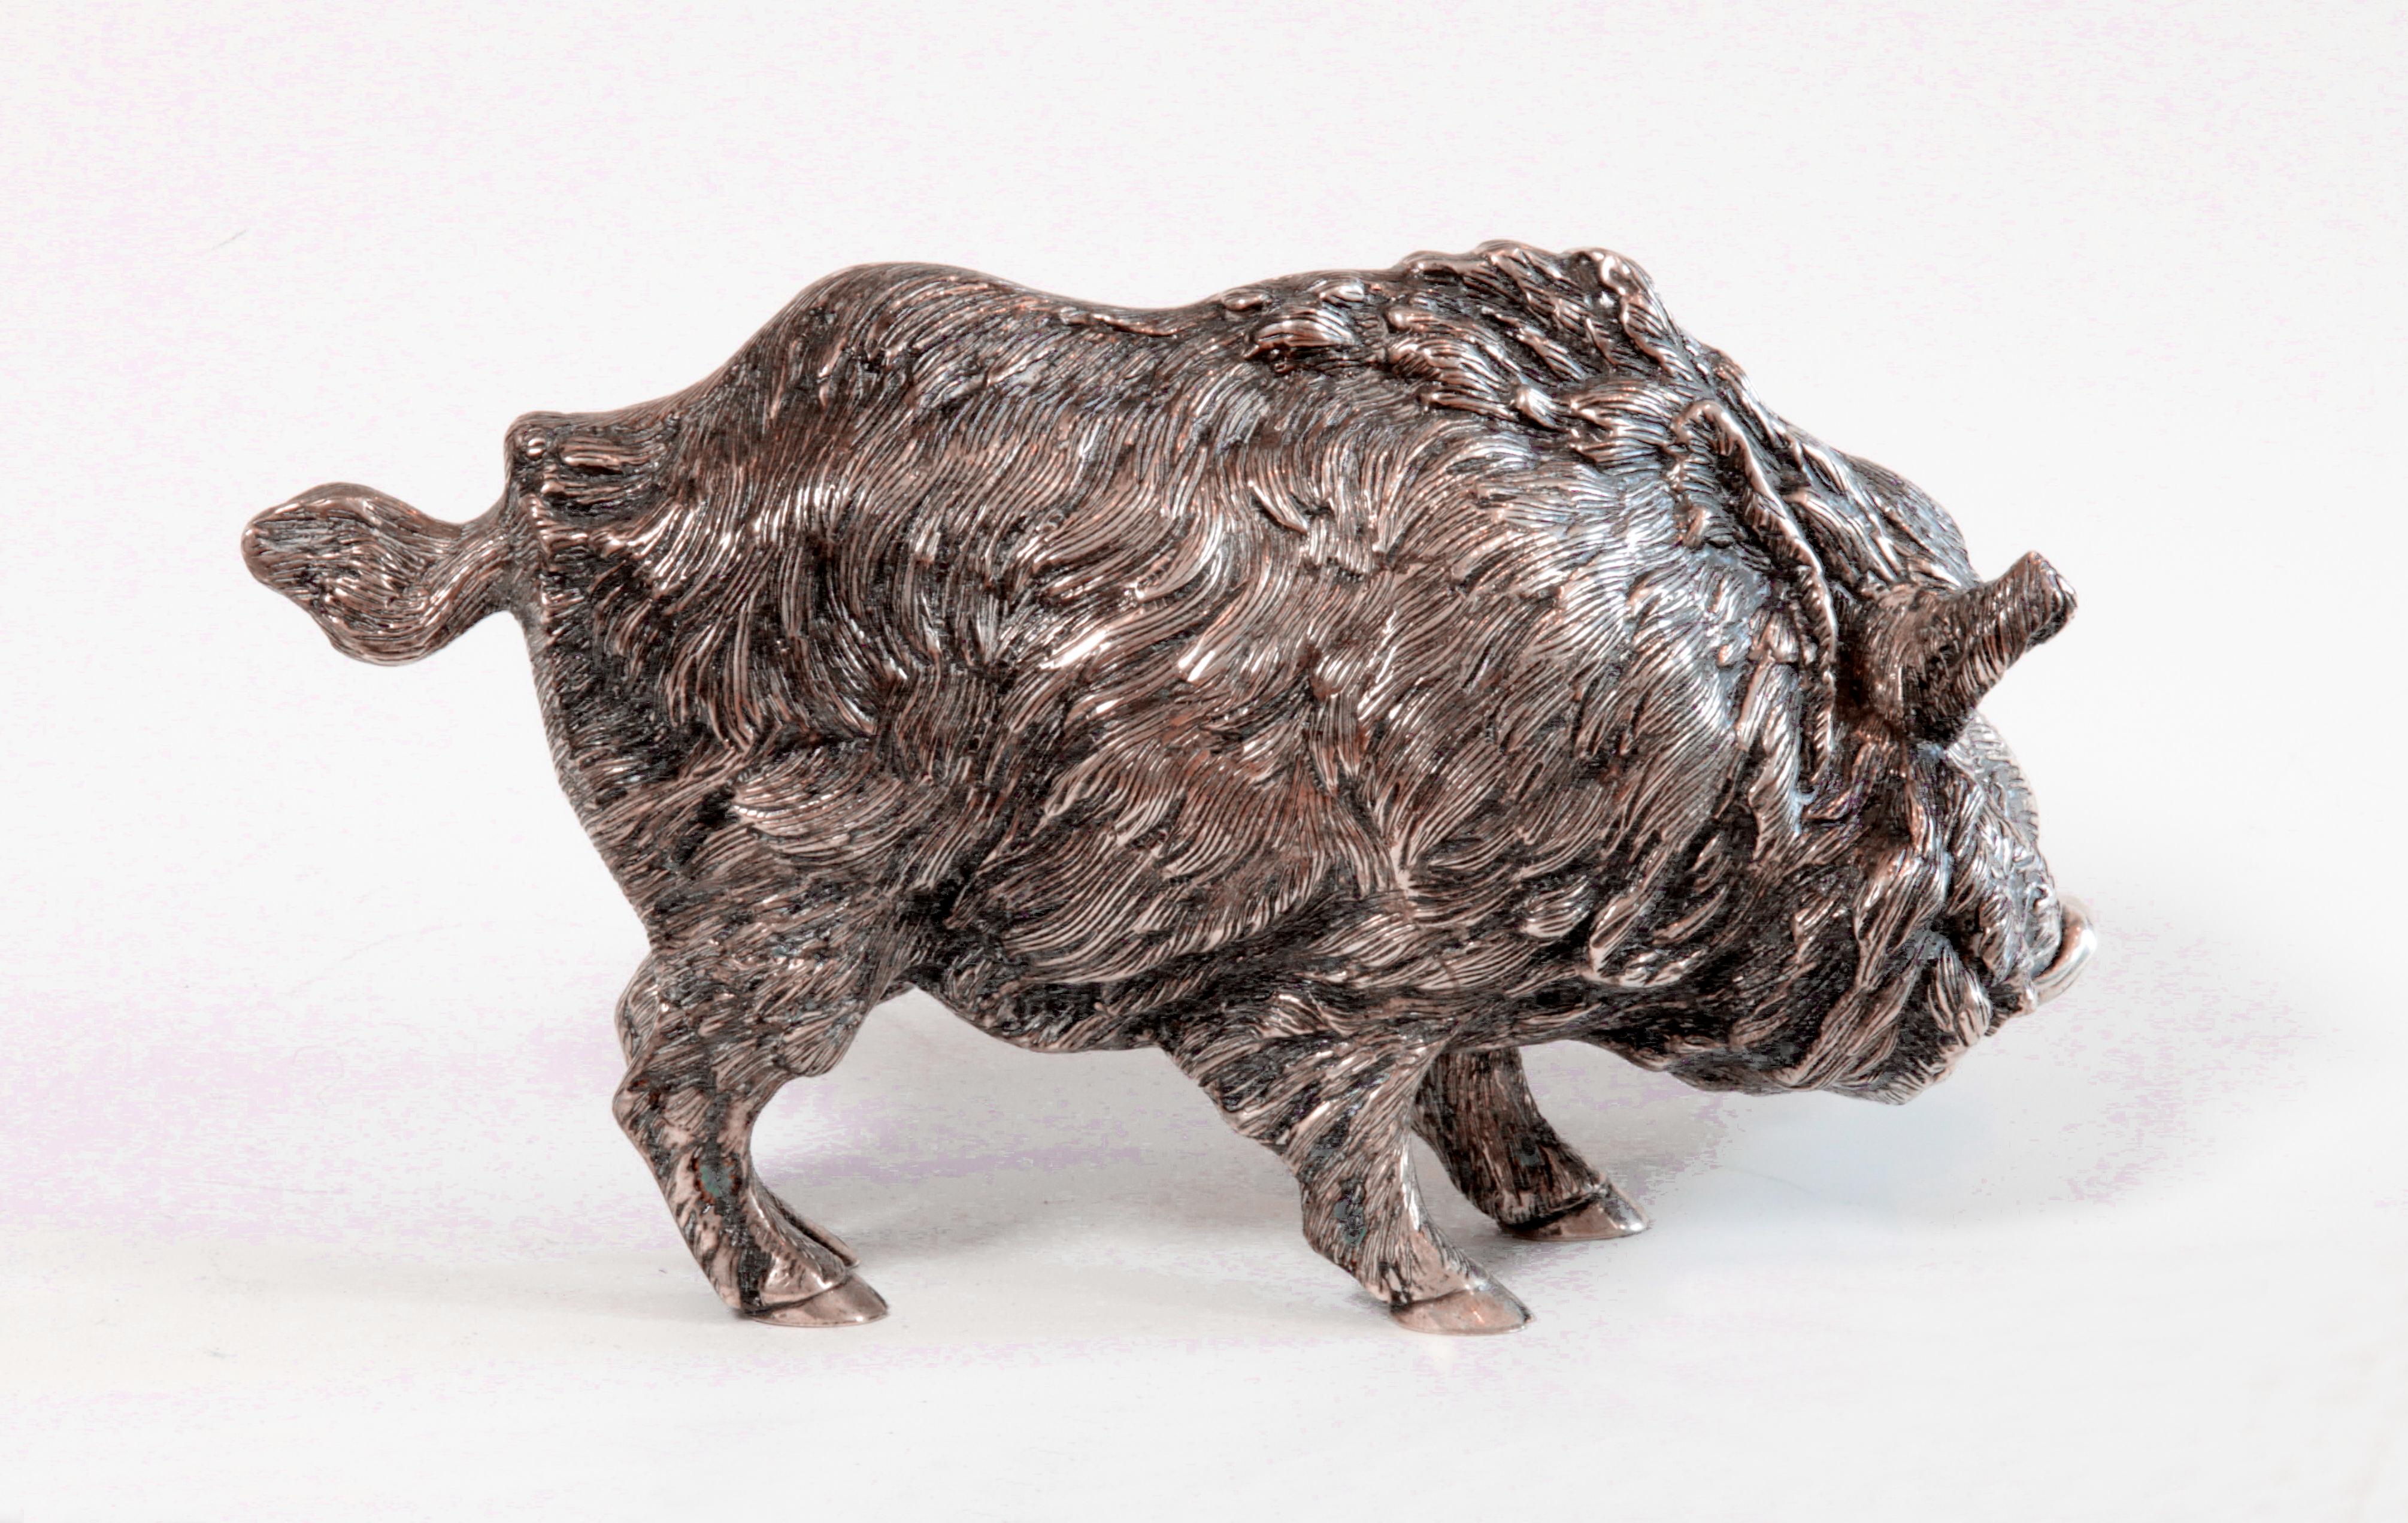 Solid silver figure of wild boar. Made in Spain, 1880. Marked on the tip at the tail.
Measurements: width 7.48 in ( 19 cm ), height 3.94 in ( 10 cm ), depth 2.36 in ( 6 cm ).

